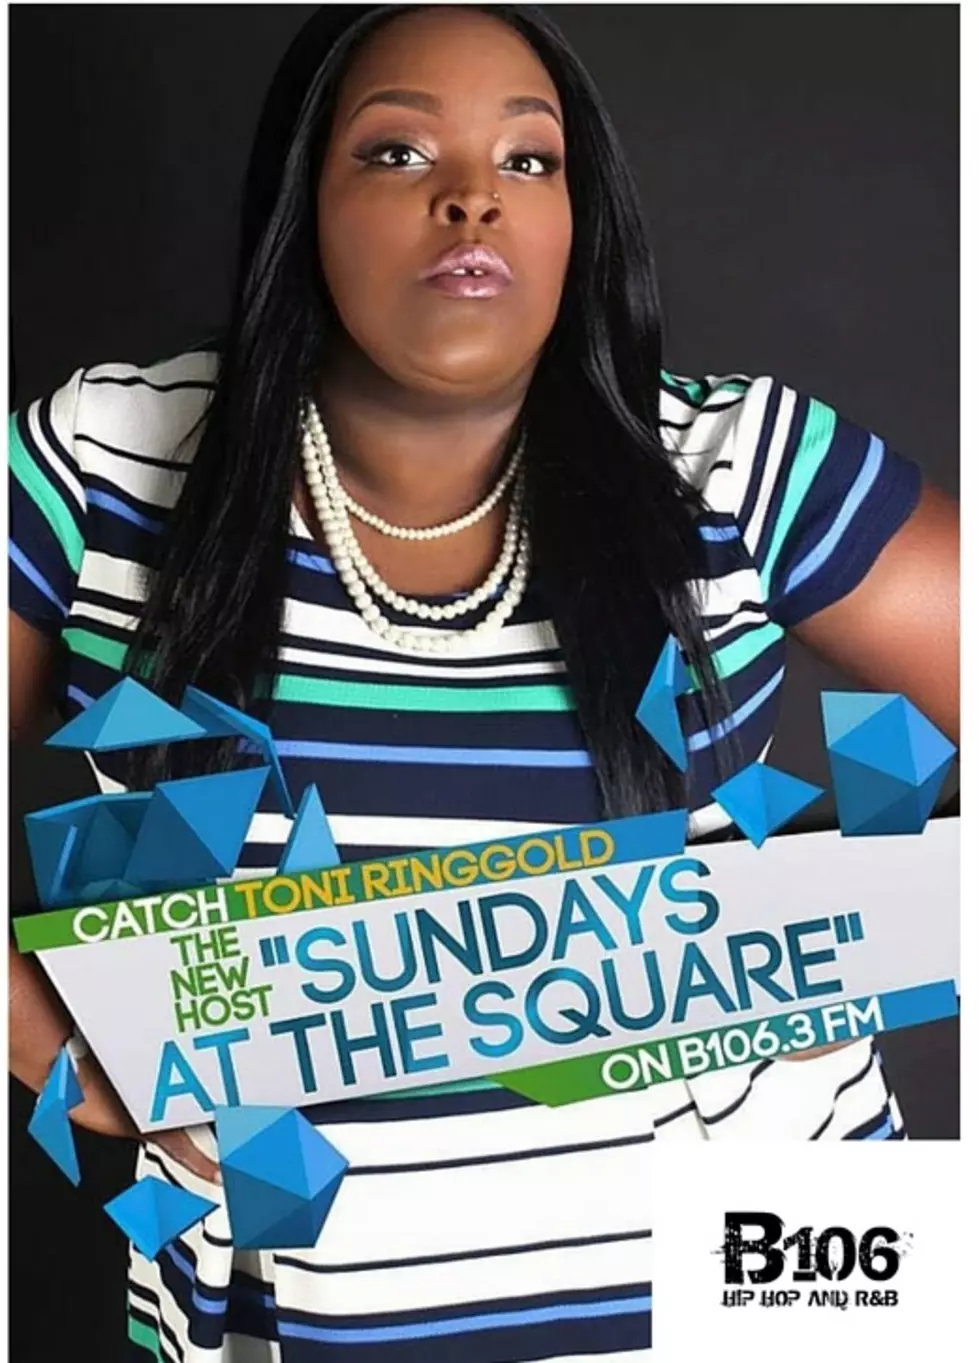 Sunday's At the Square 